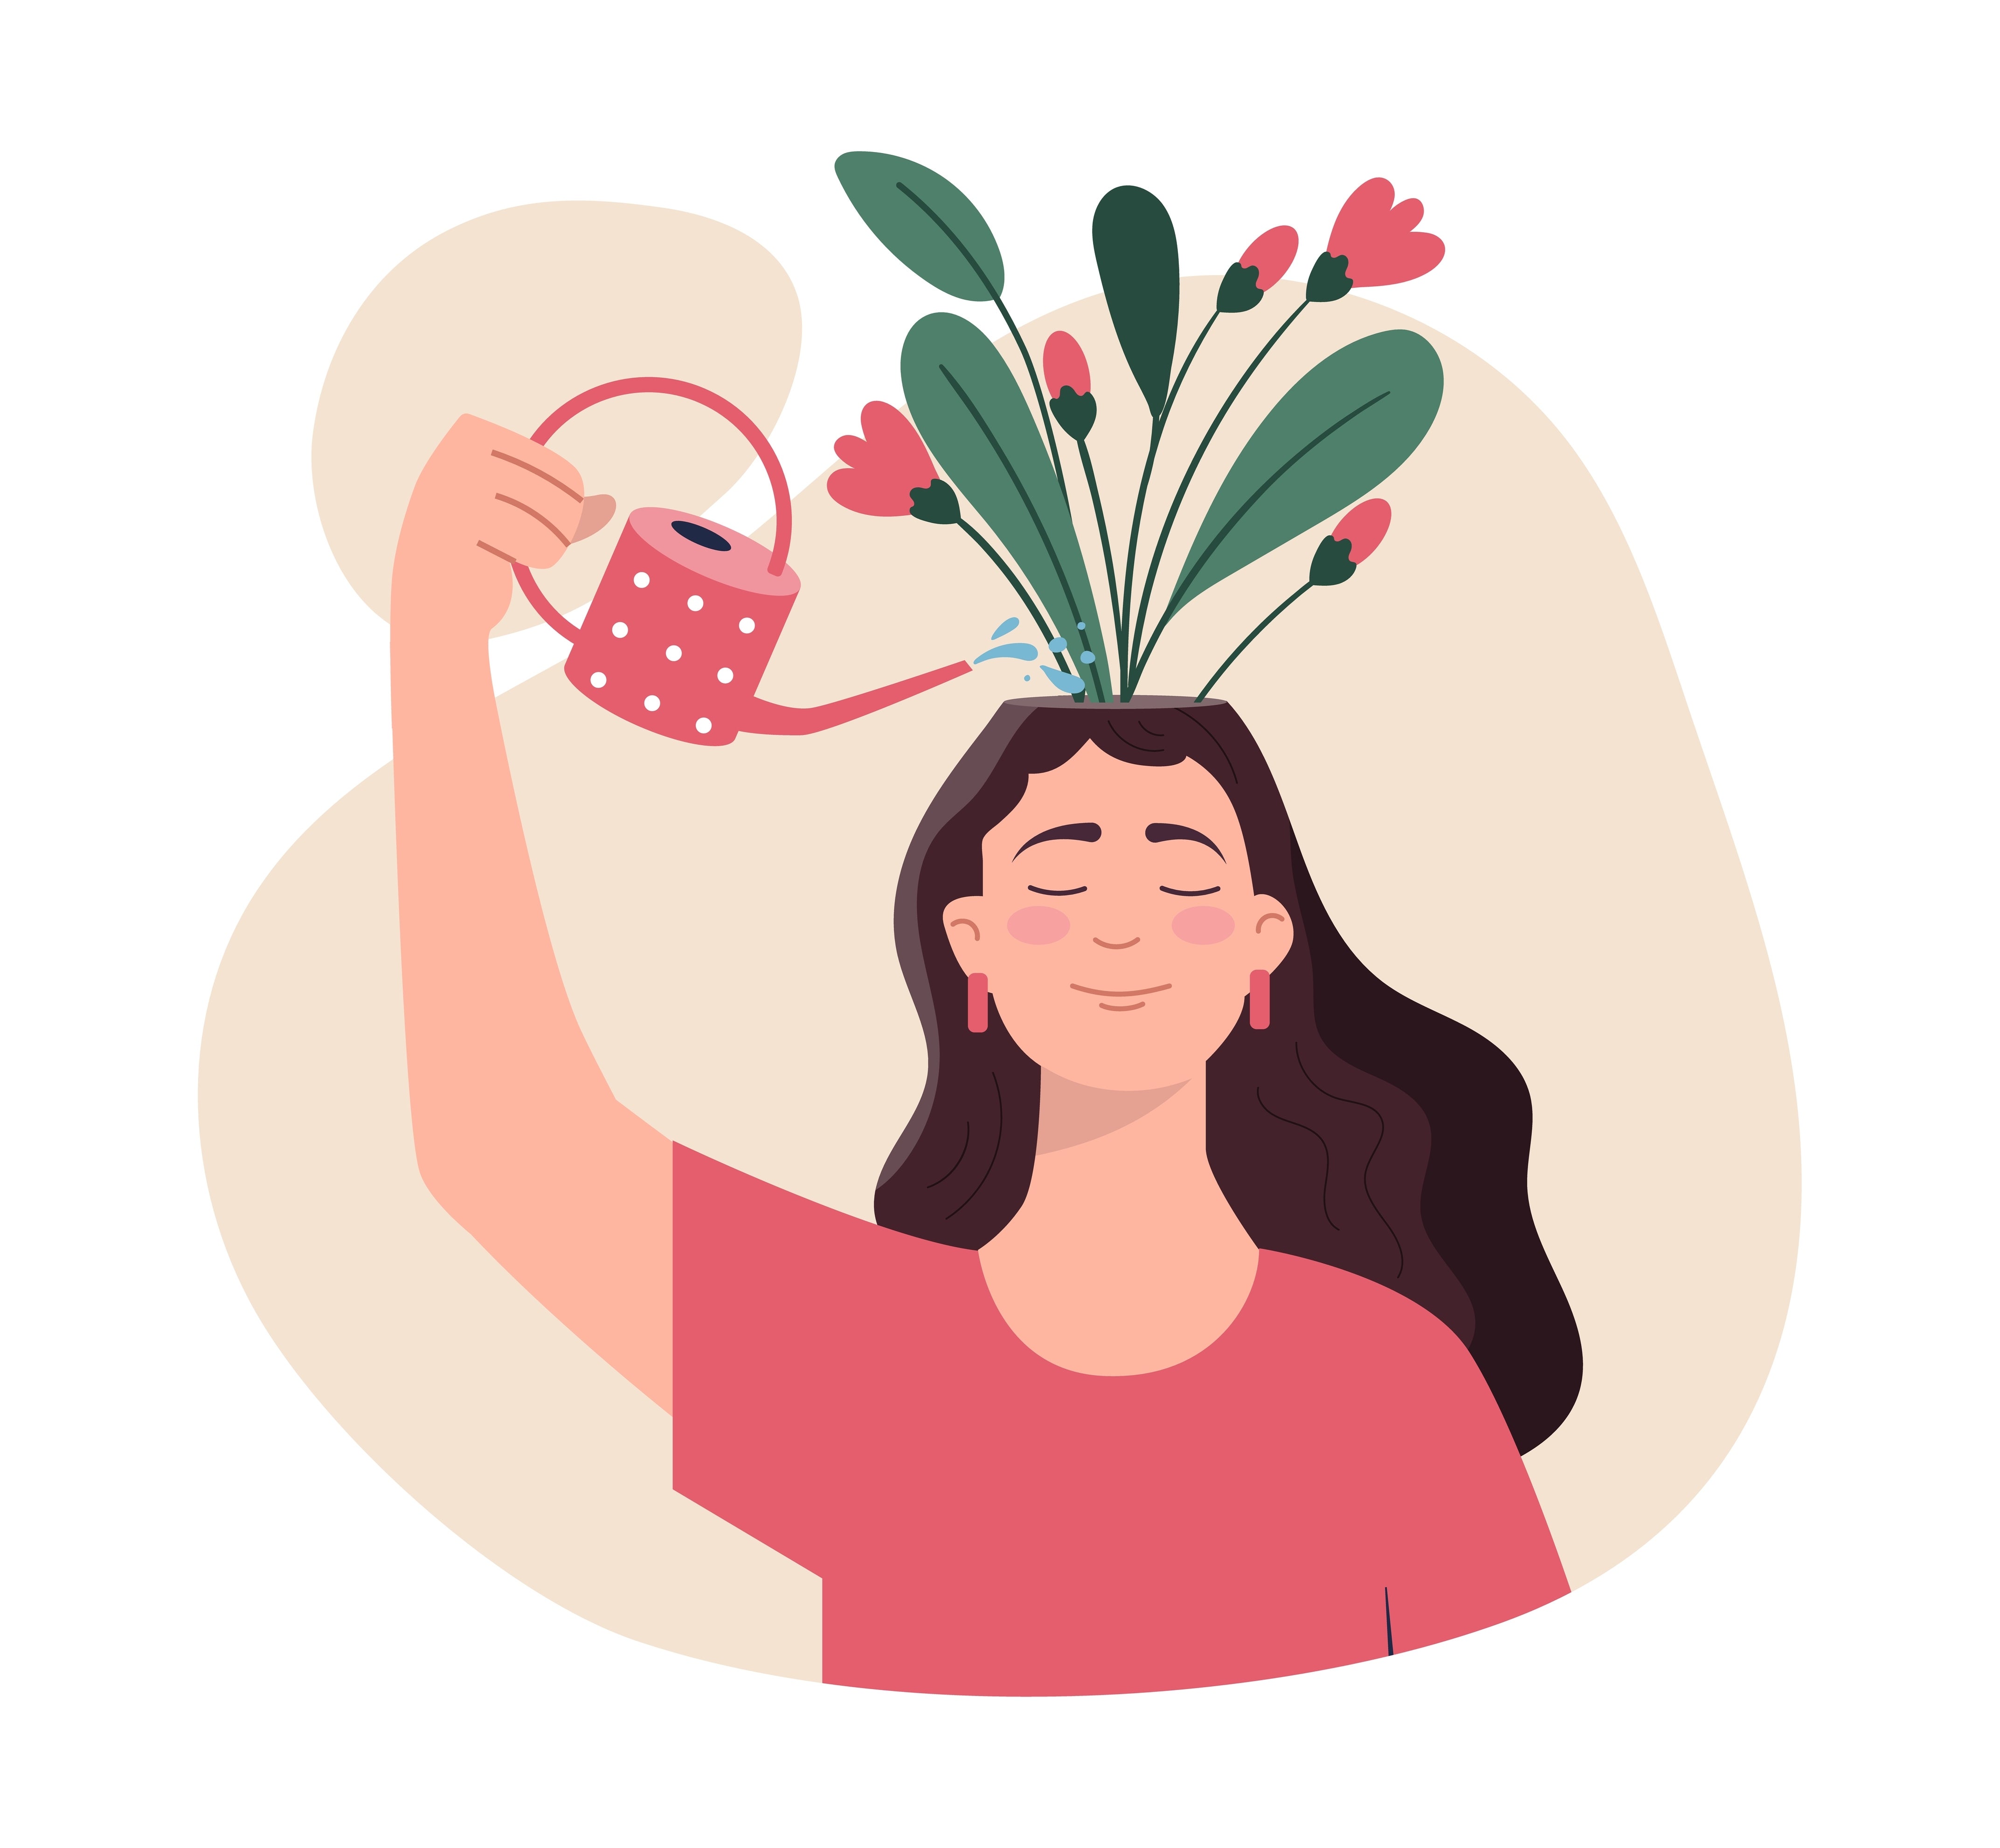 Girl watering flowers on her head with watering can.